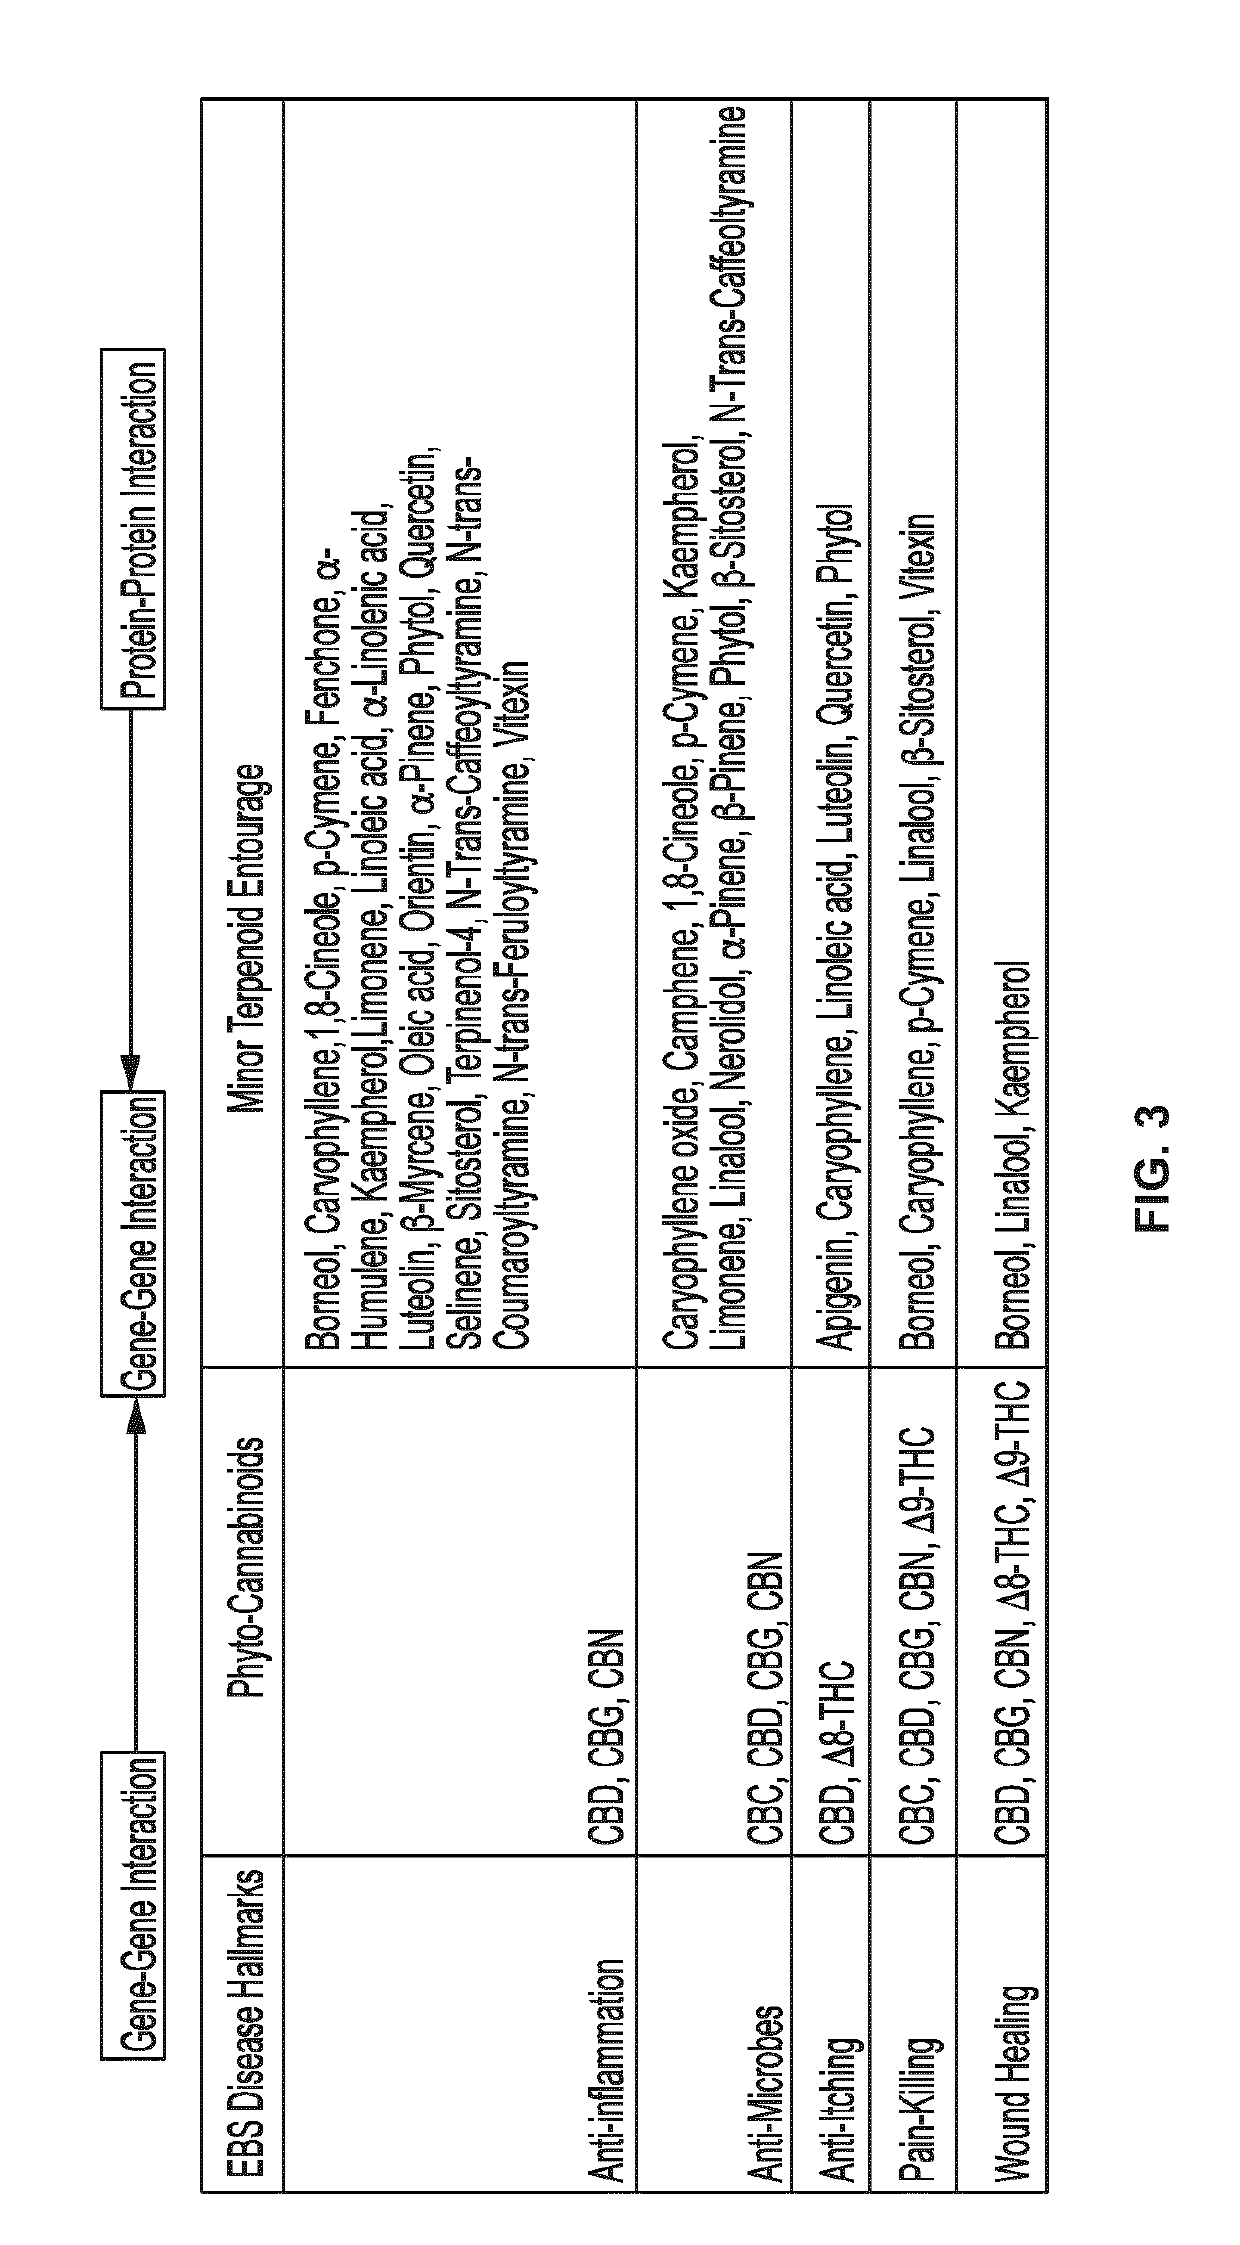 Use of topical formulations of cannabinoids in the treatment of epidermolysis bullosa and related connective tissue disorders